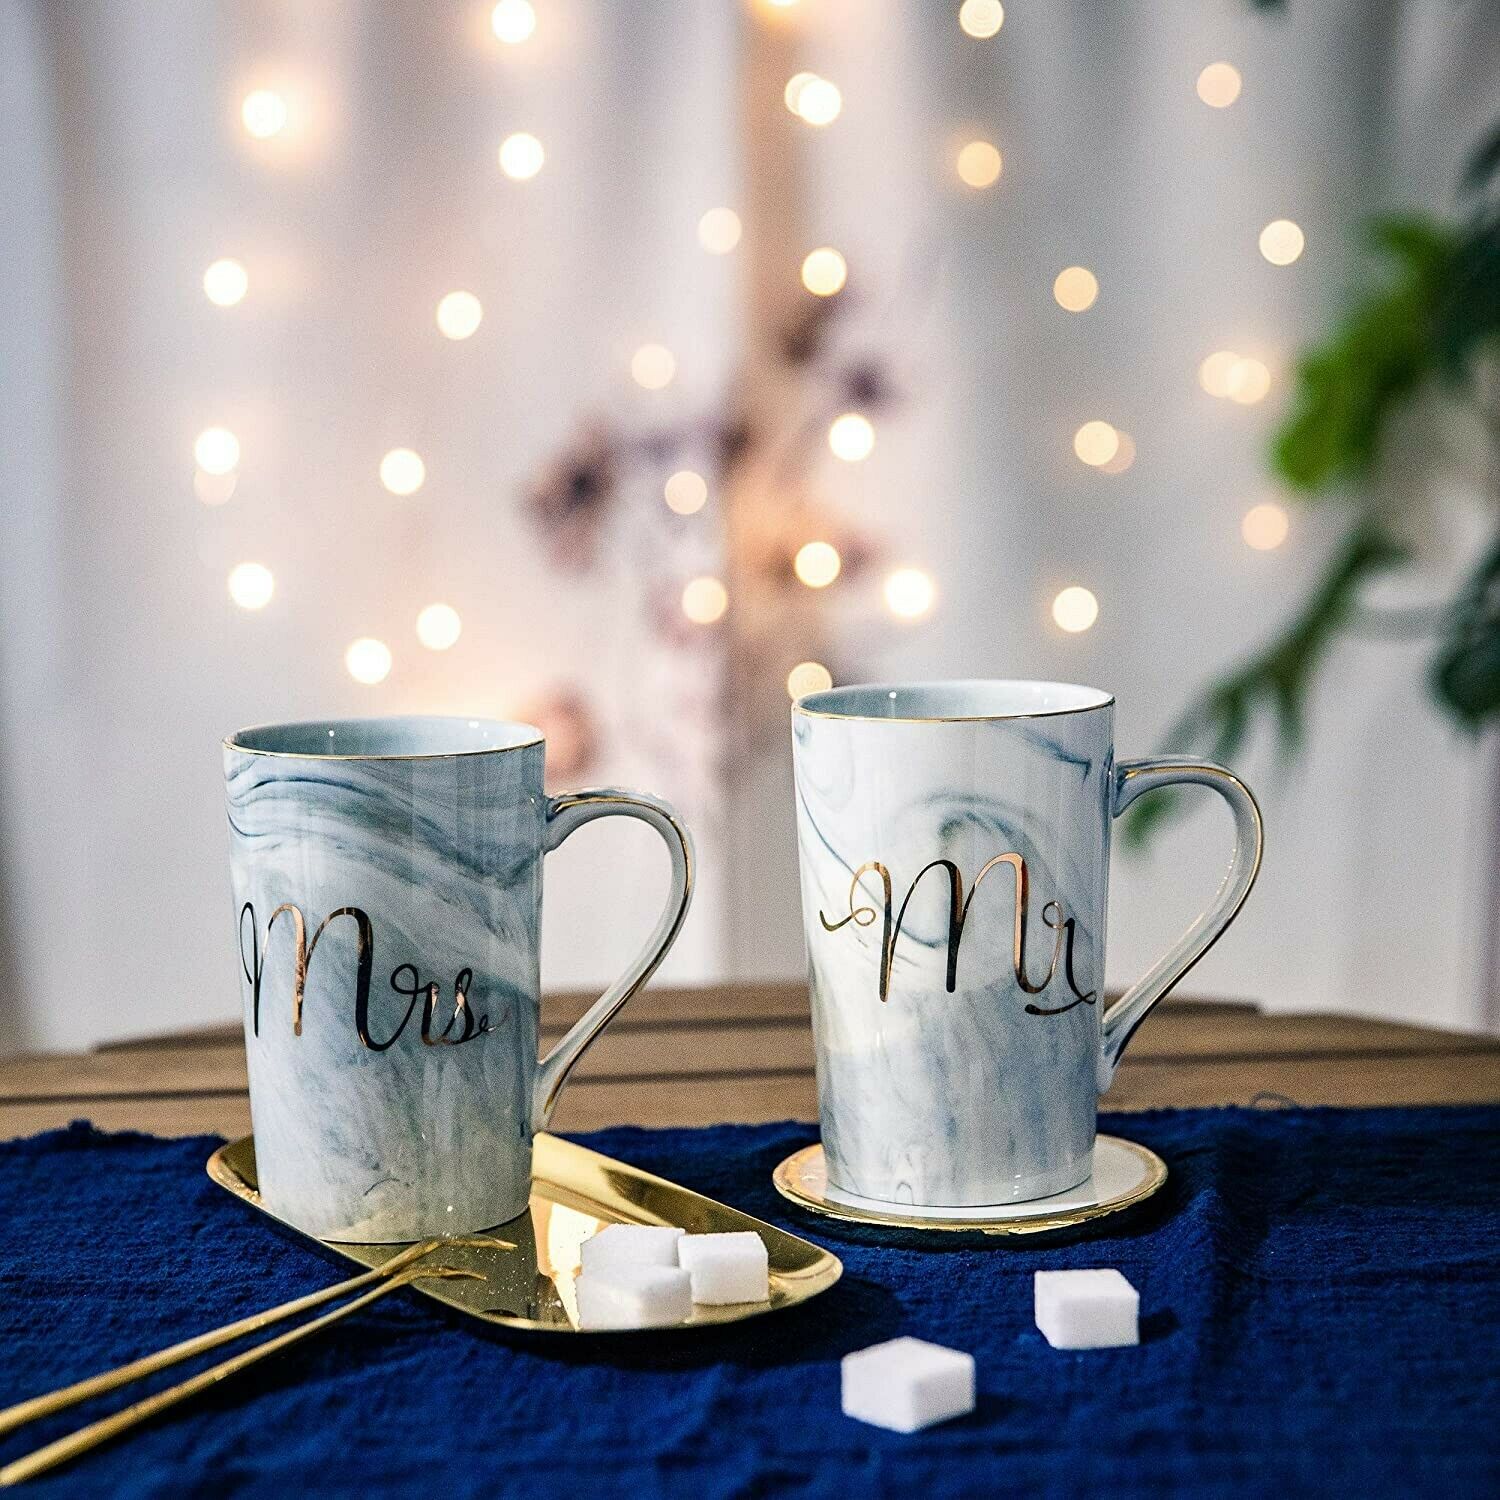 Mr. and Mrs. Coffee Mugs Wedding, and Married Couples Anniversary Gift.